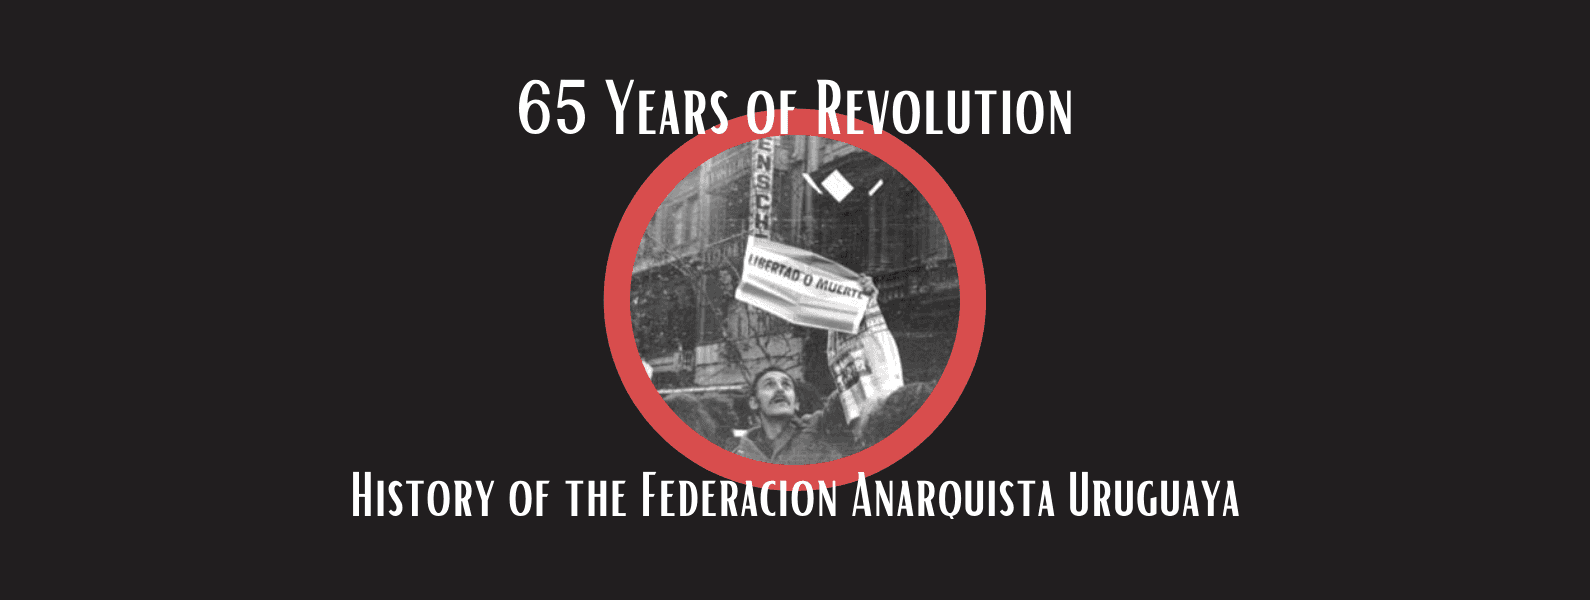 65 Years of Revolution - Featured image